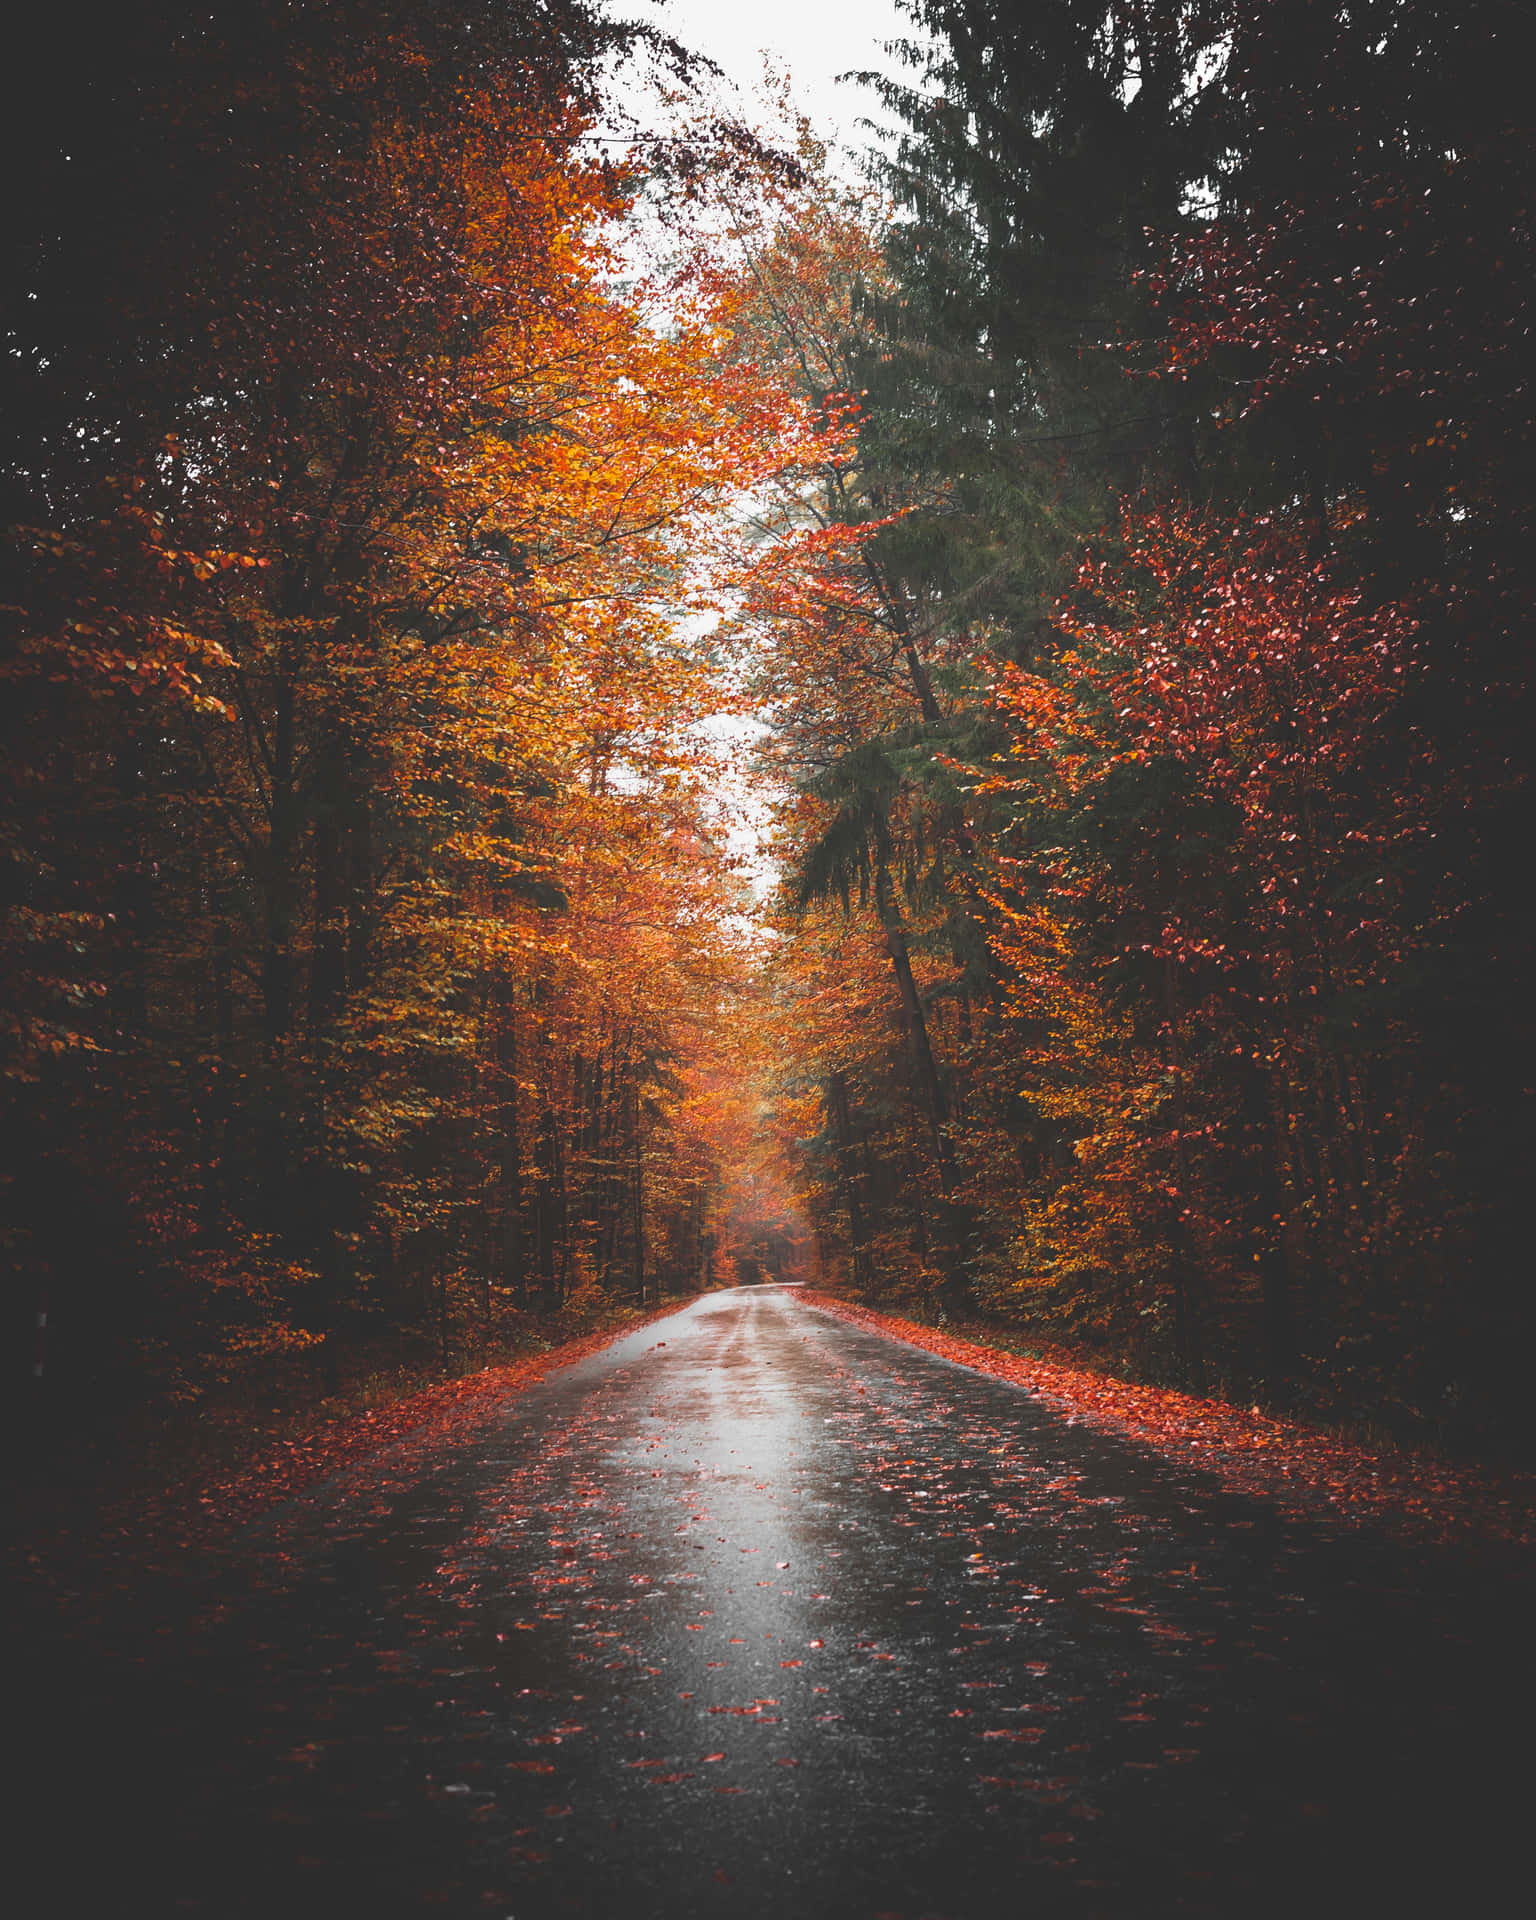 Fall Tumblr Wet Road With Fallen Leaves Wallpaper